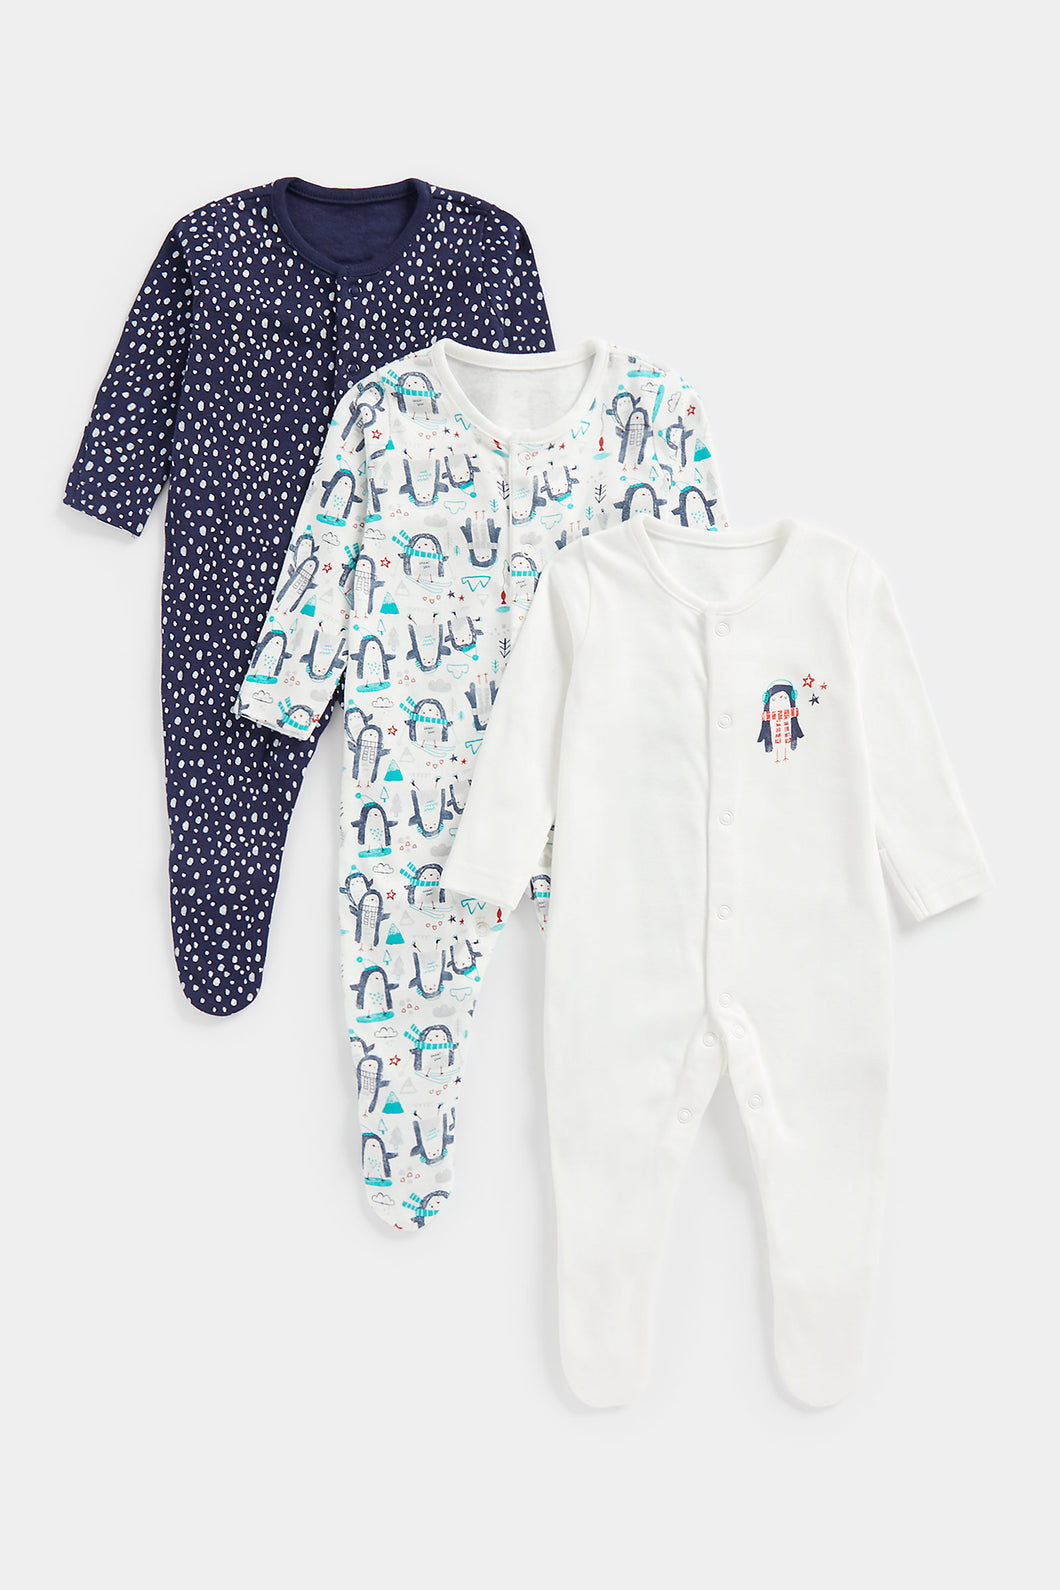 Mothercare Penguins Sleepsuits - 3 Pack